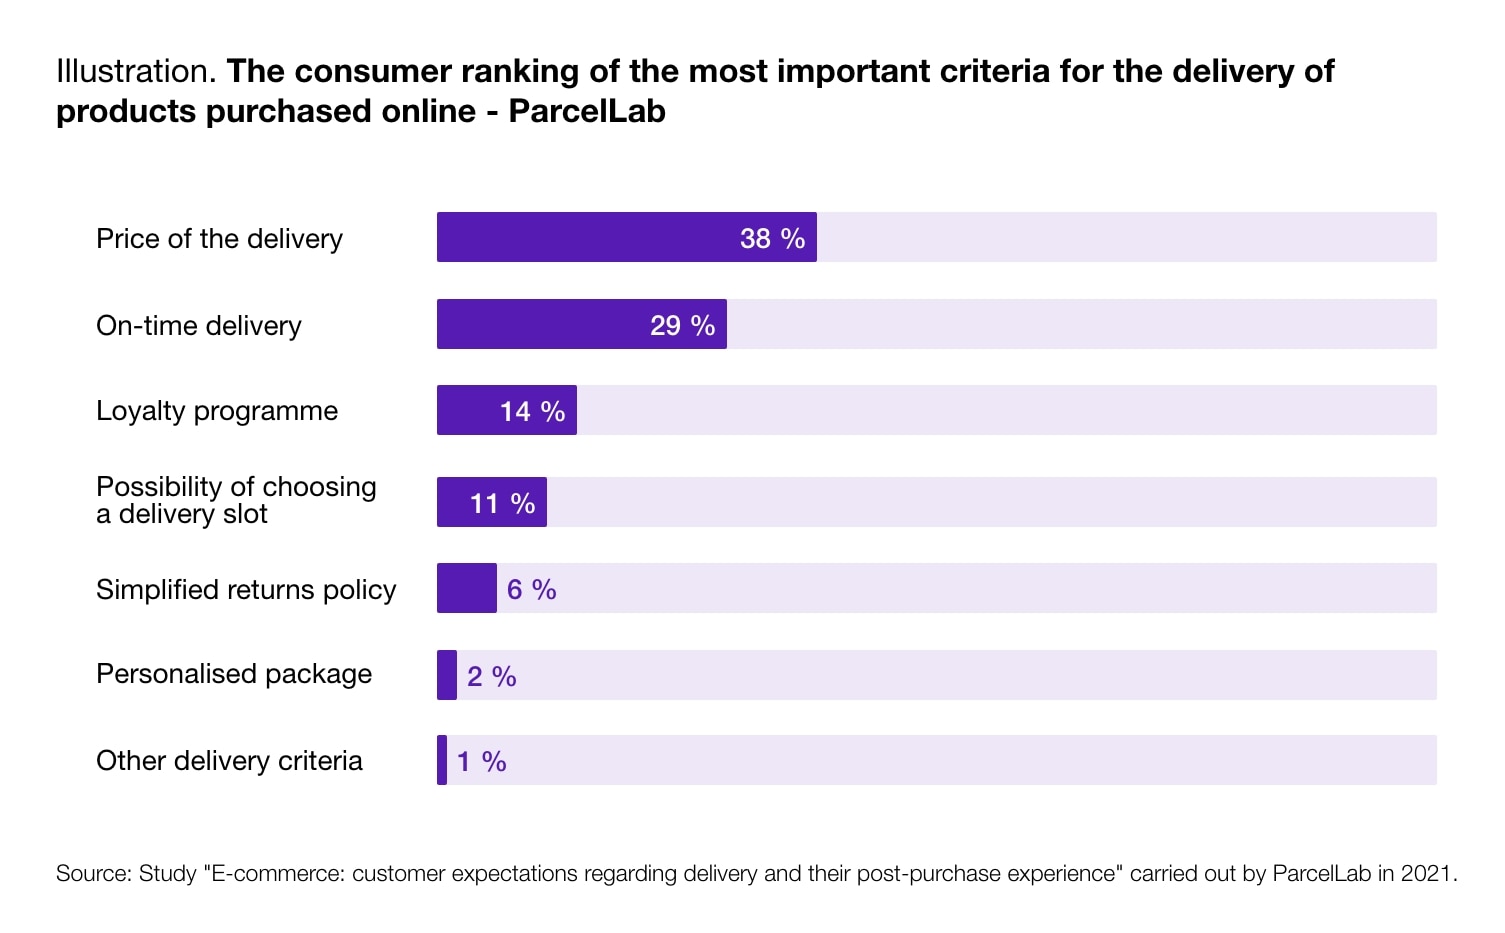 Diagram showing most important criteria for the delivery of products purchased online according to consumers.